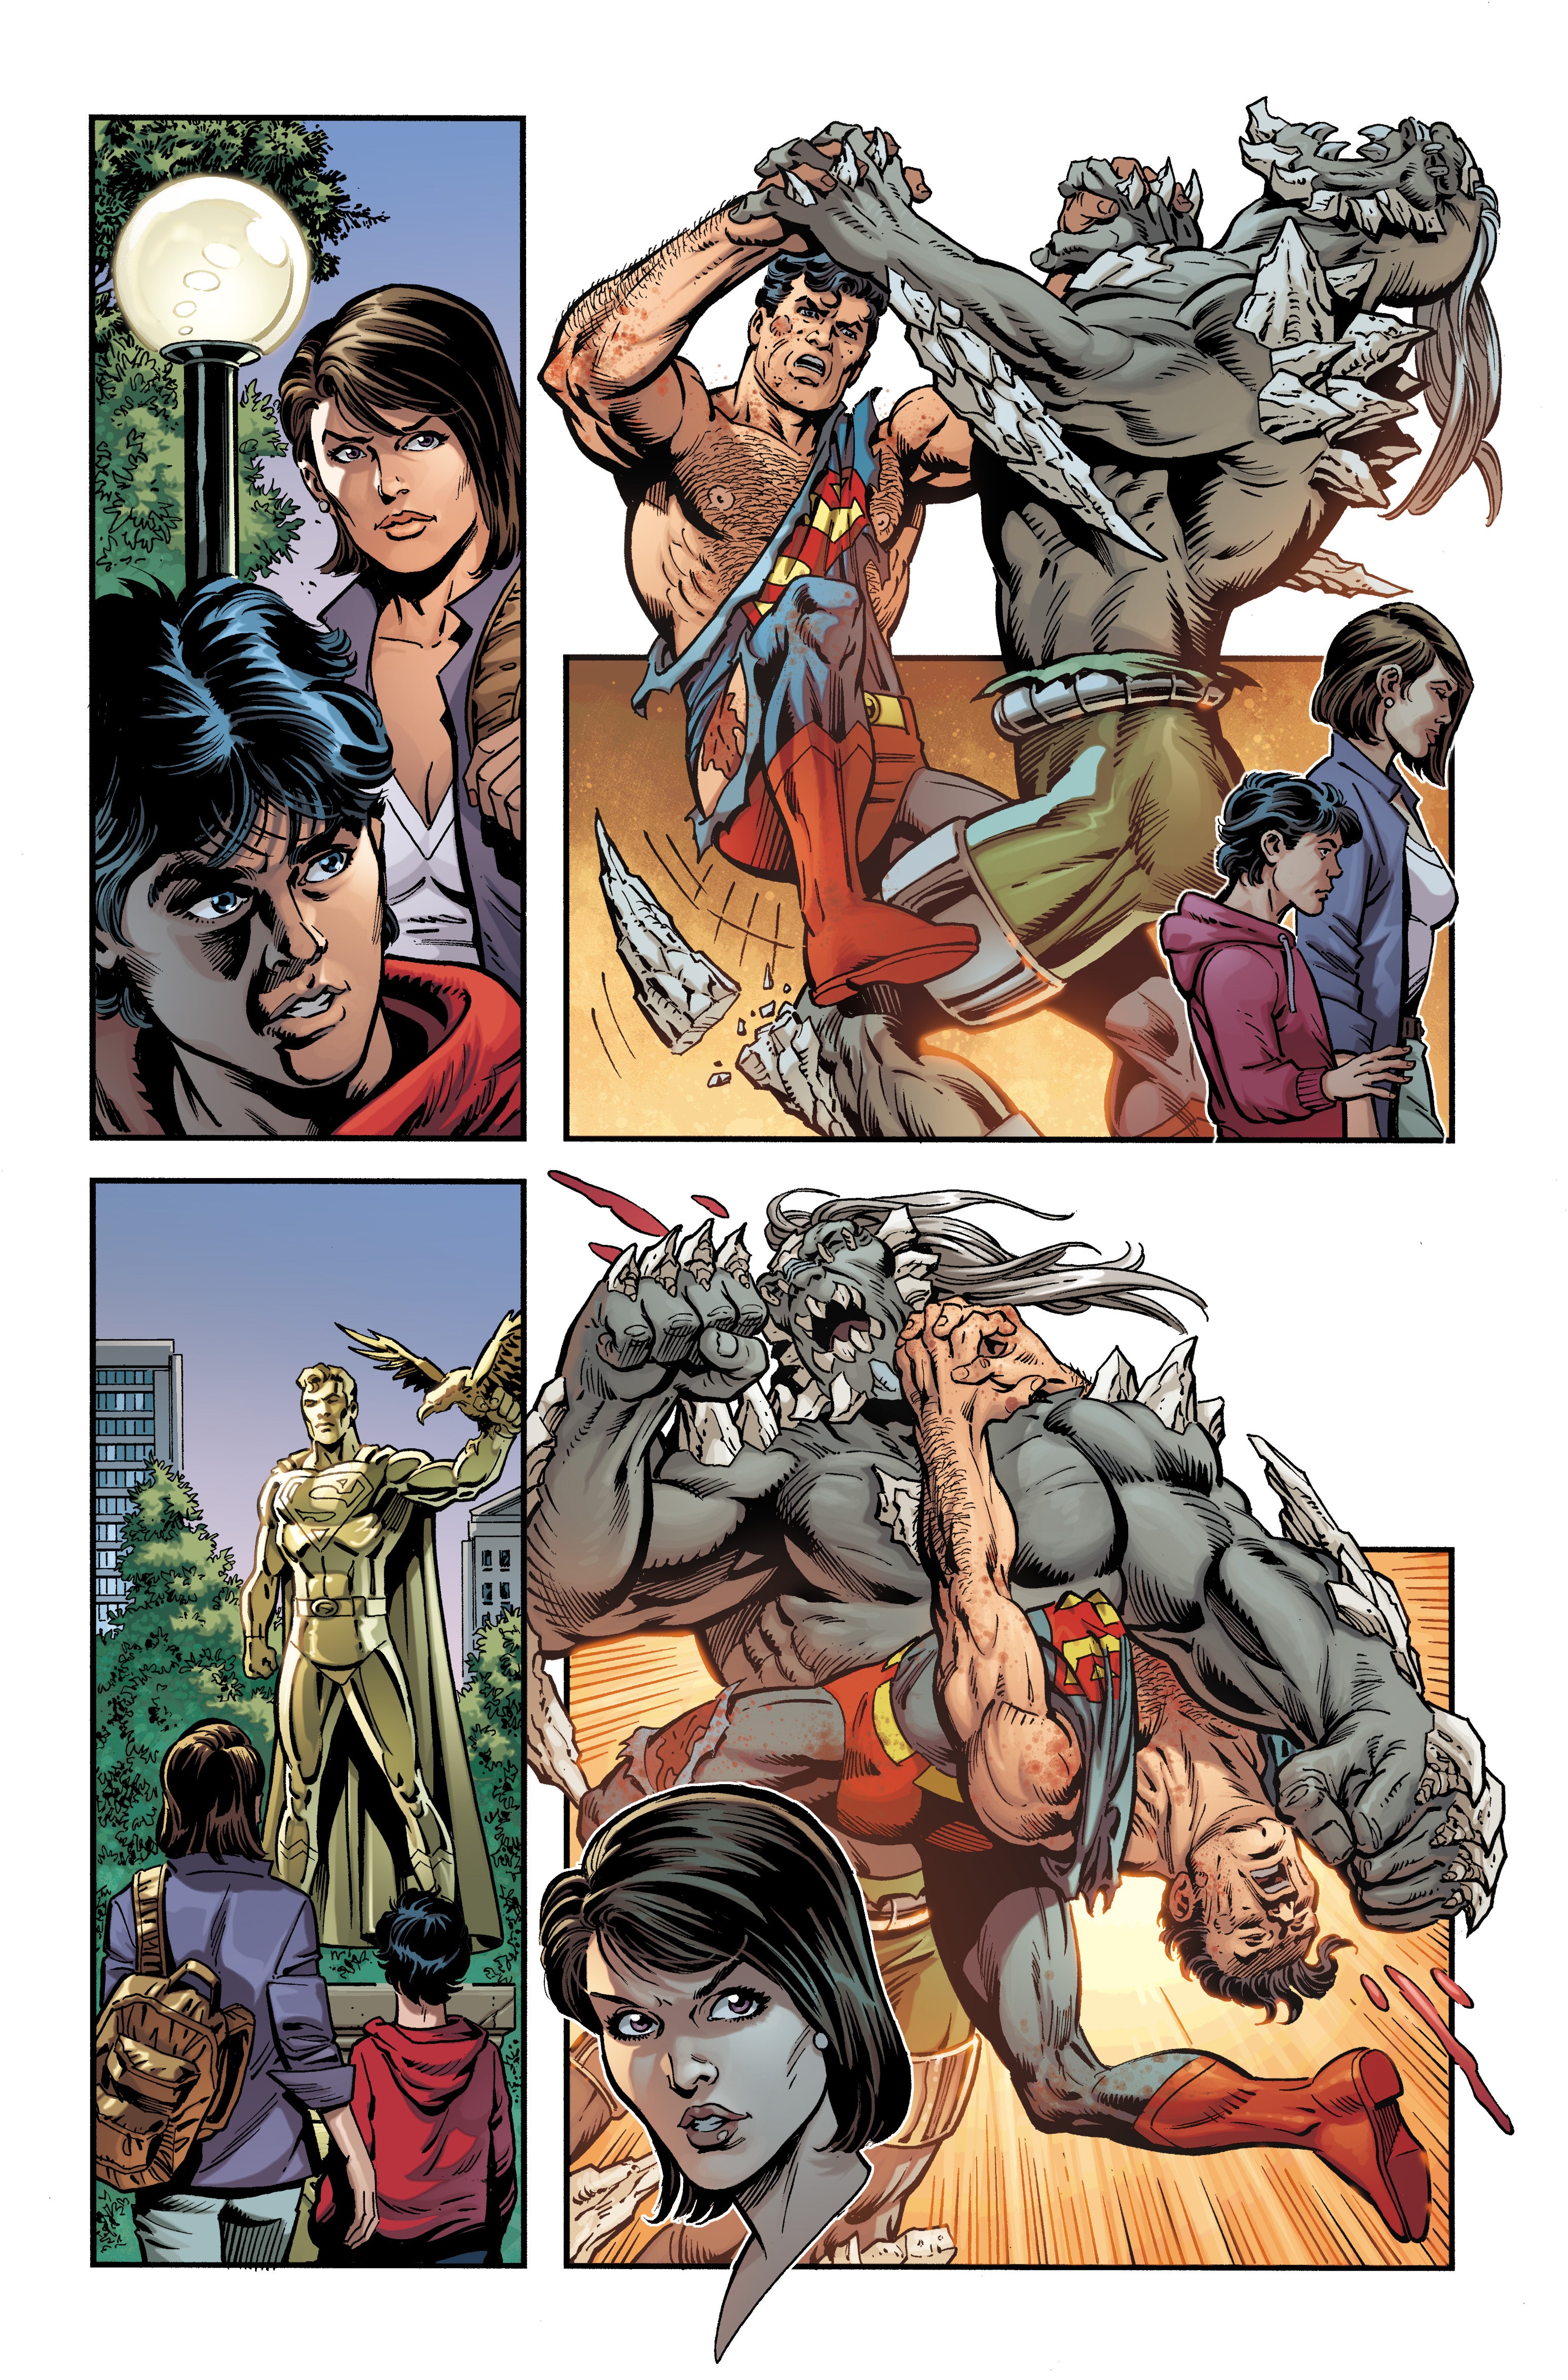 Interior comics page featuring Superman fighting as people watch on